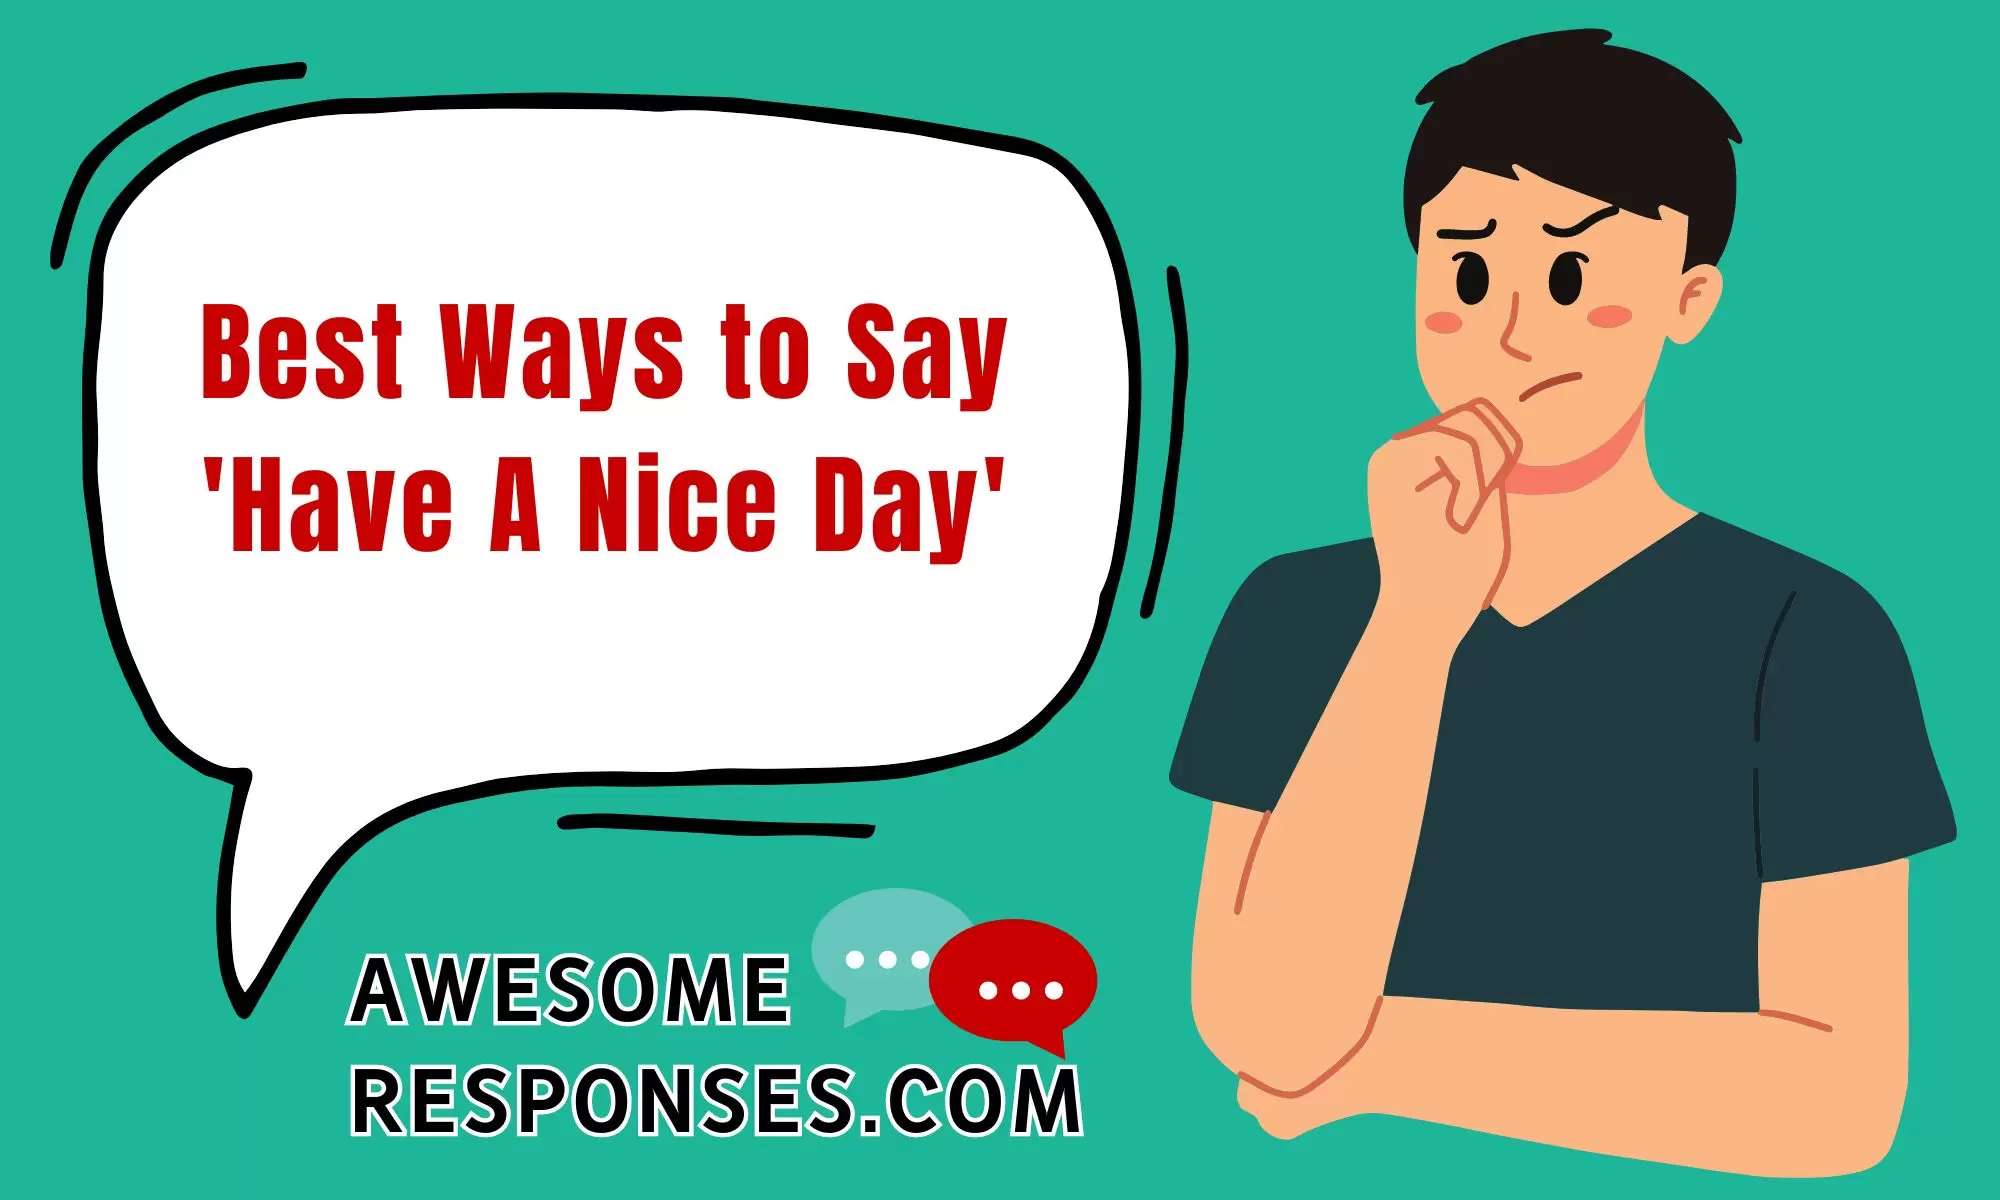 Best Ways to Say 'Have A Nice Day'